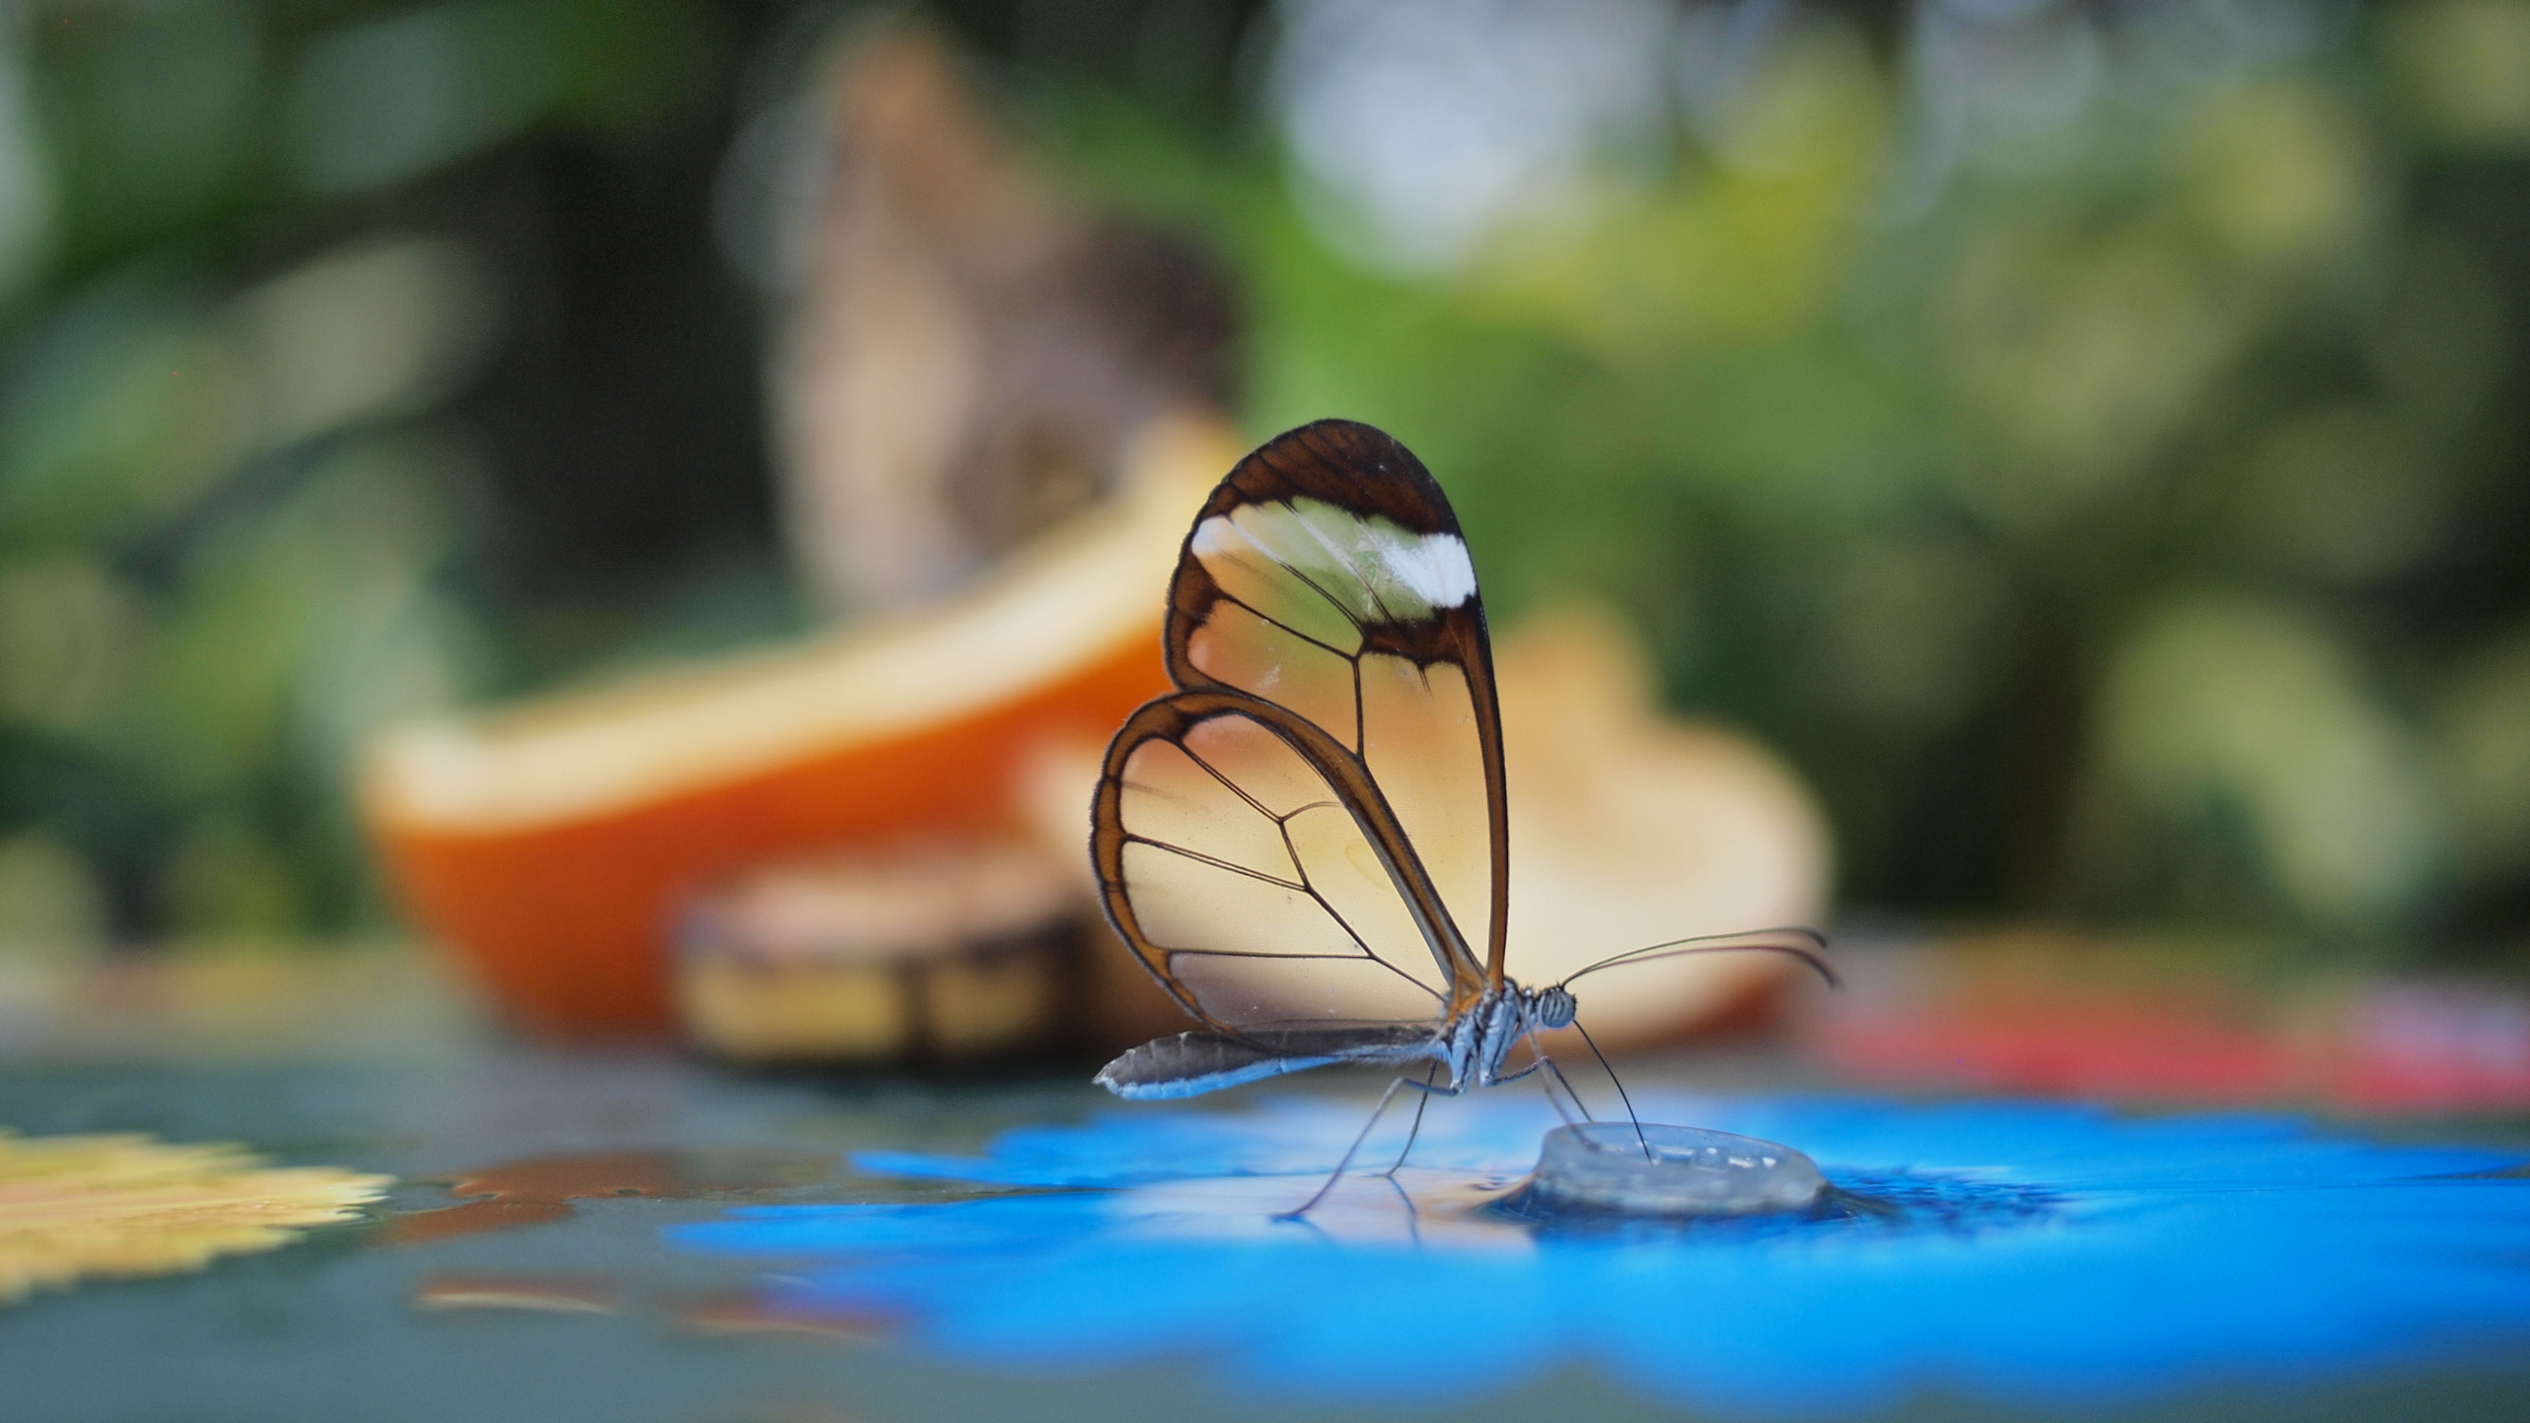 Translucent Glasswinged Butterfly